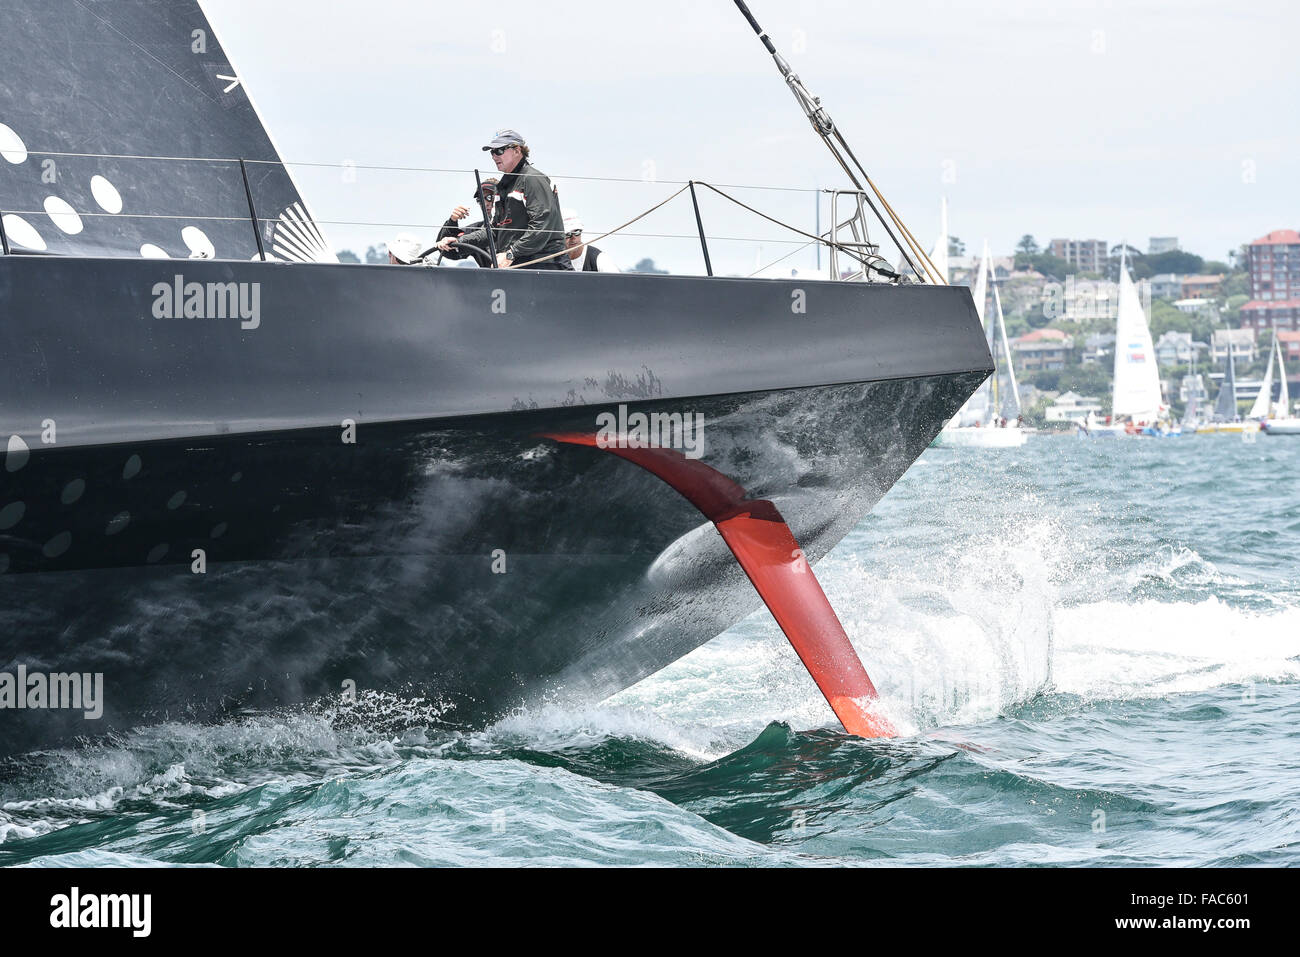 Sydney, Australia. 26th Dec, 2015. Rolex Sydney to Hobart Yacht race 2015. Comanche owned by Jim Clark &amp; Kristy Hinze Clark from SA skippered by skipper Ken Read type 100 Supermaxi during the start of the 629 nautical mile race from Sydney to Hobart on Sydney Harbour. © Action Plus Sports/Alamy Live News Stock Photo